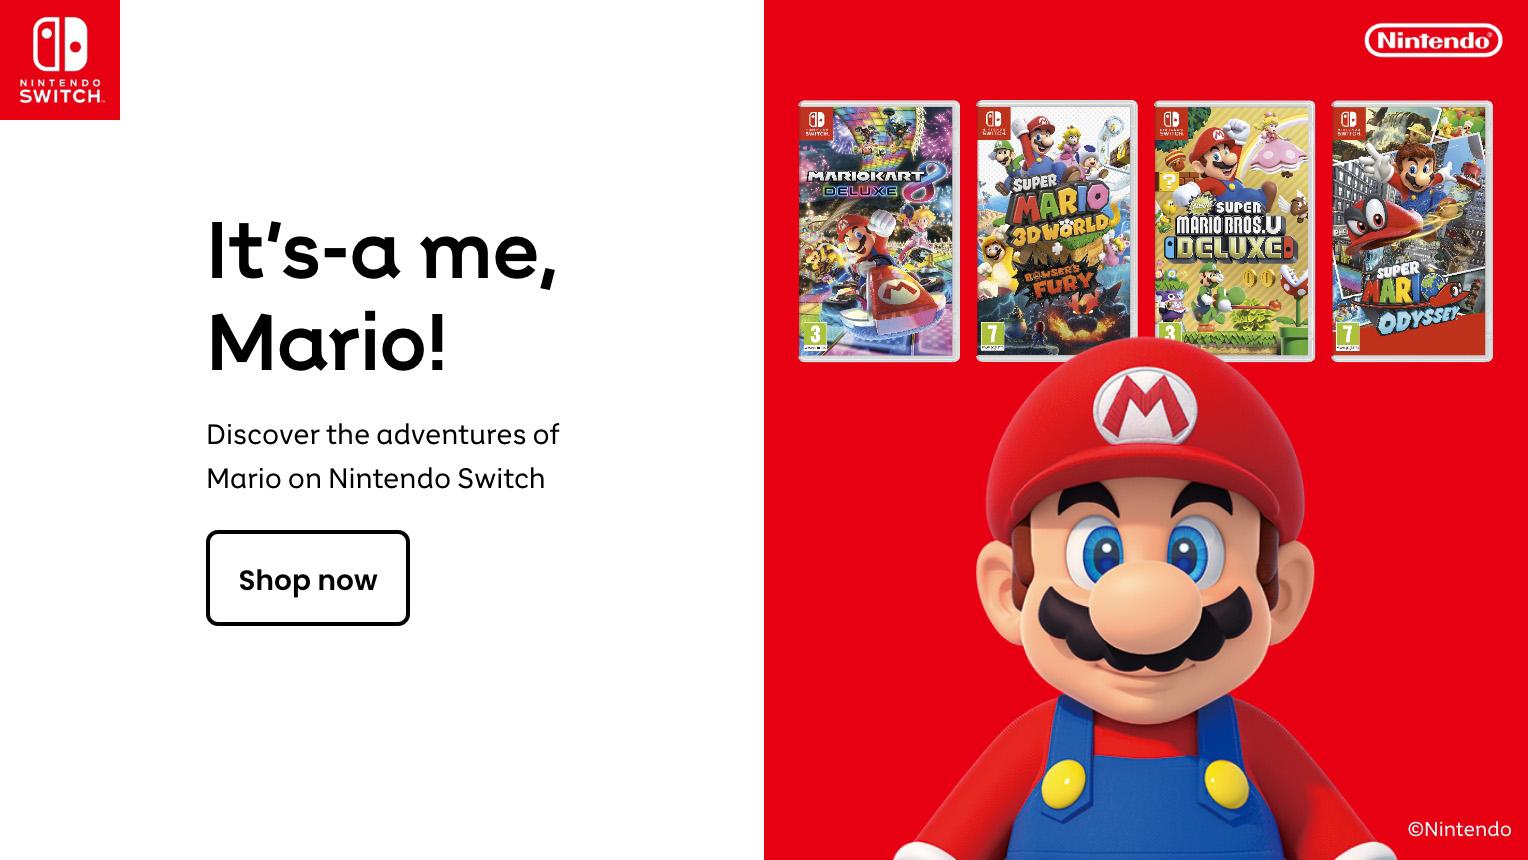 It's-a-me, Mario! Discover new adventures of Mario on Nintendo Switch